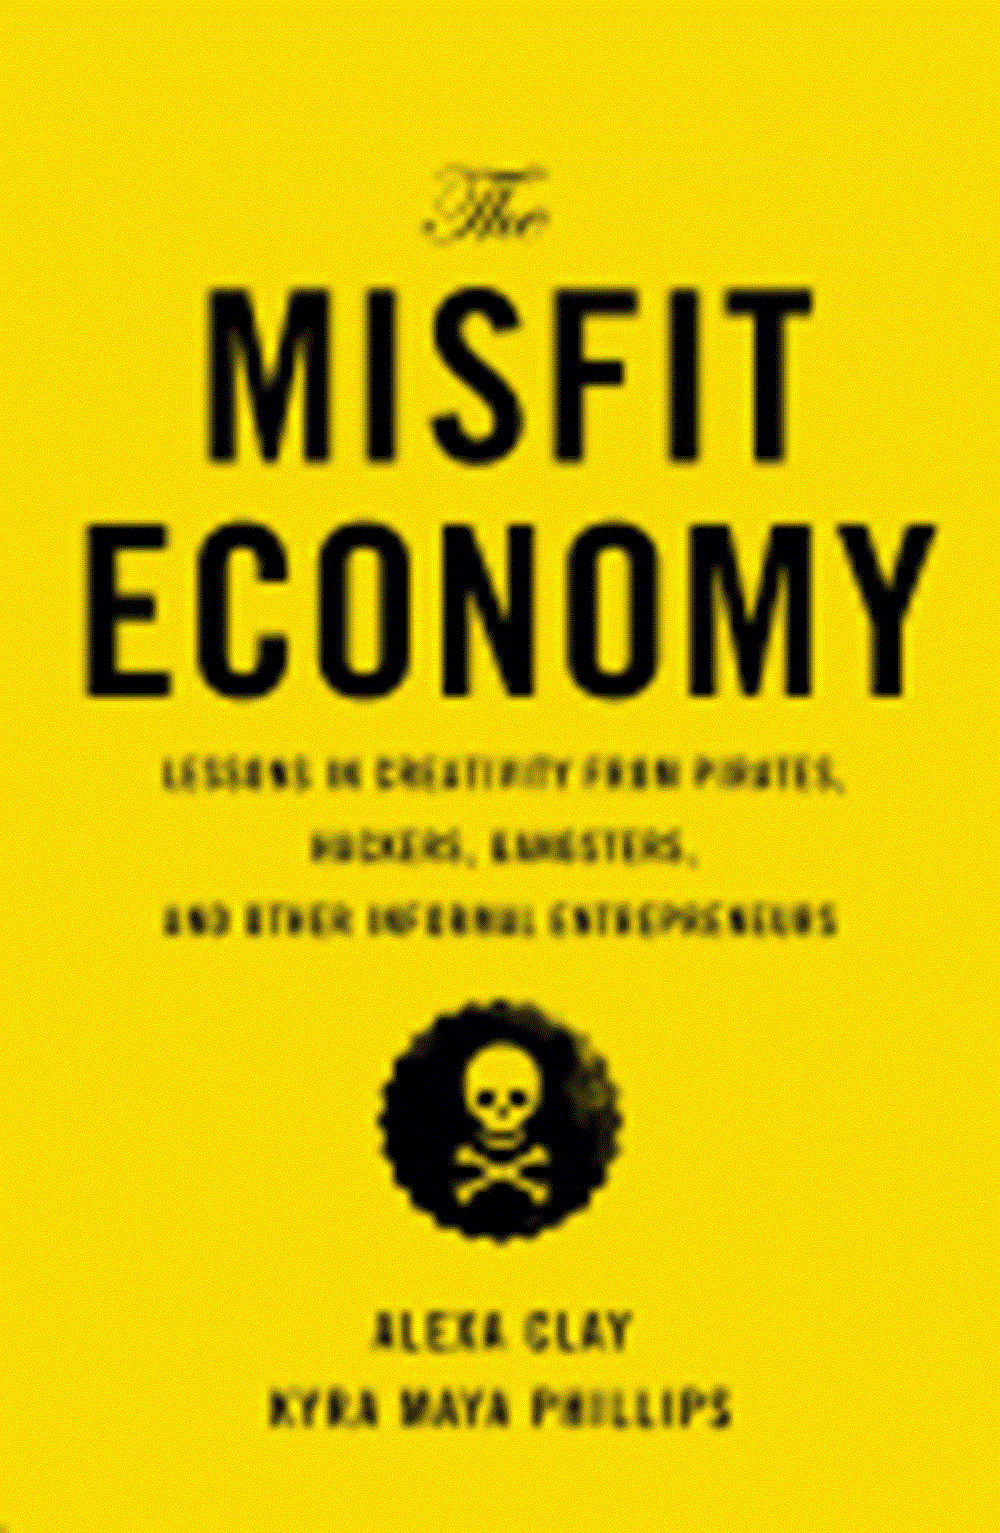 Misfit Economy: Lessons in Creativity from Pirates, Hackers, Gangsters and Other Informal Entreprene